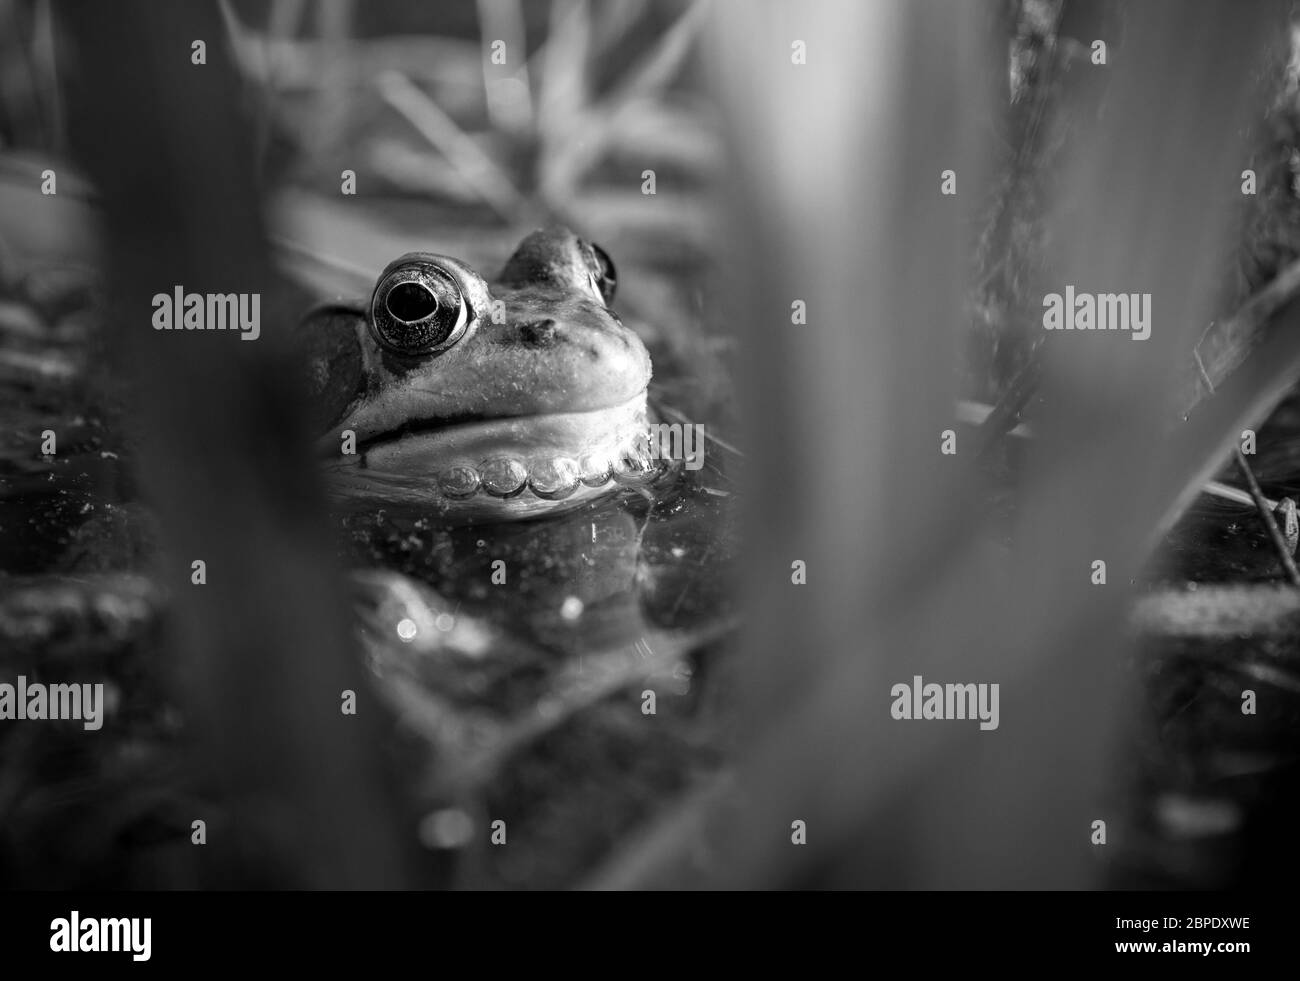 A black and white image of a frog sitting in a wetland or marsh in New Haven, CT, USA Stock Photo